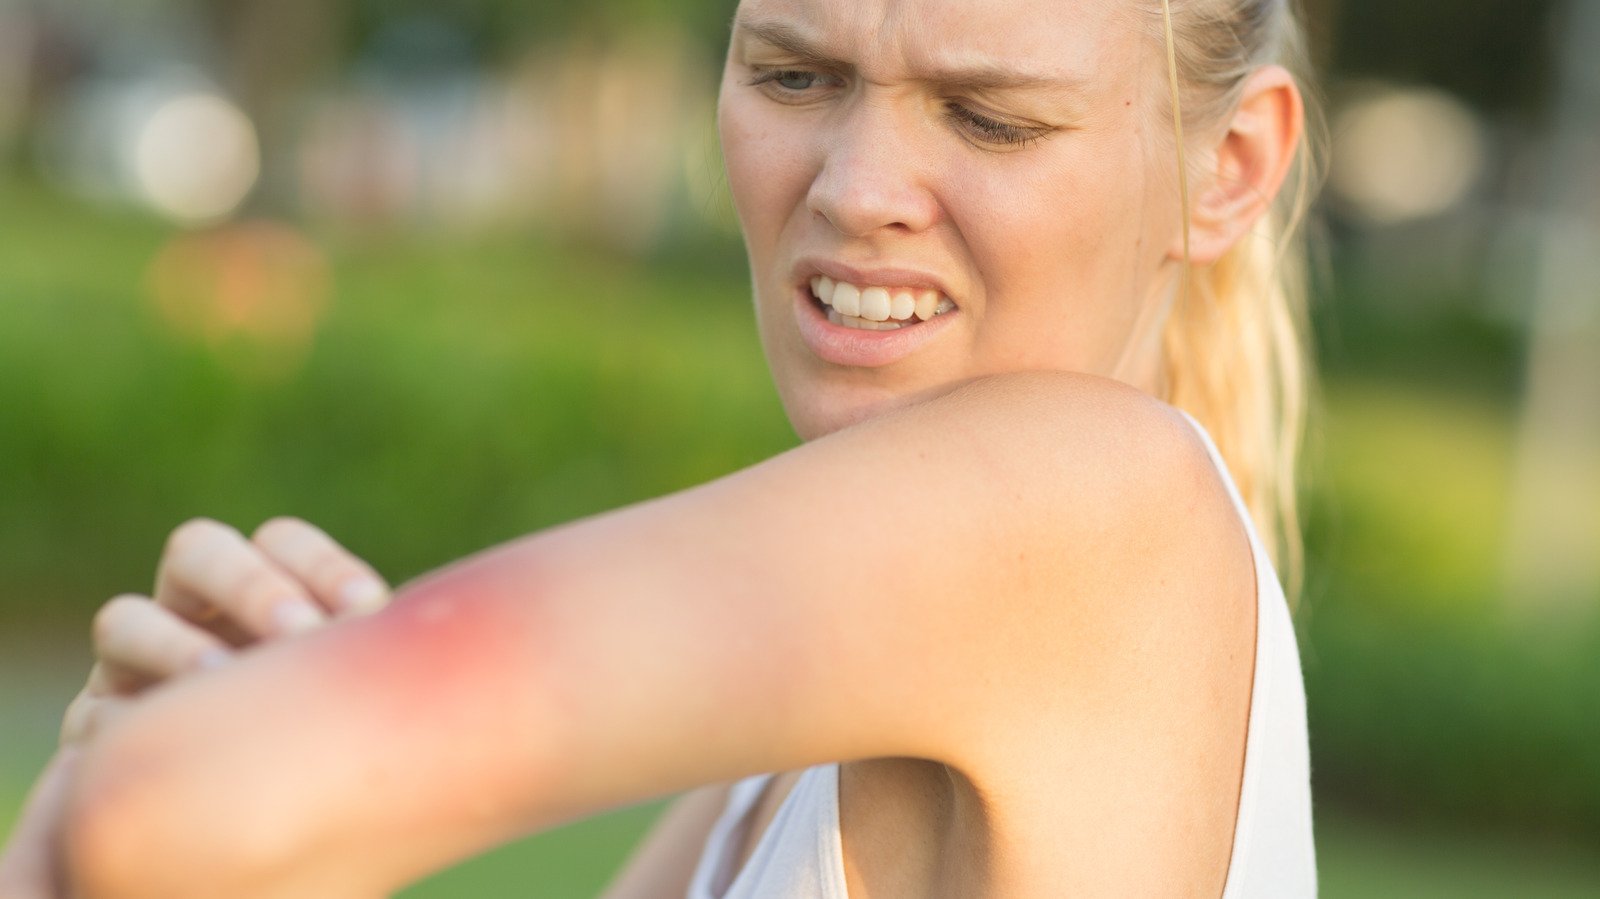 The Most Common Bug Bites To Get In The Summer - Health Digest